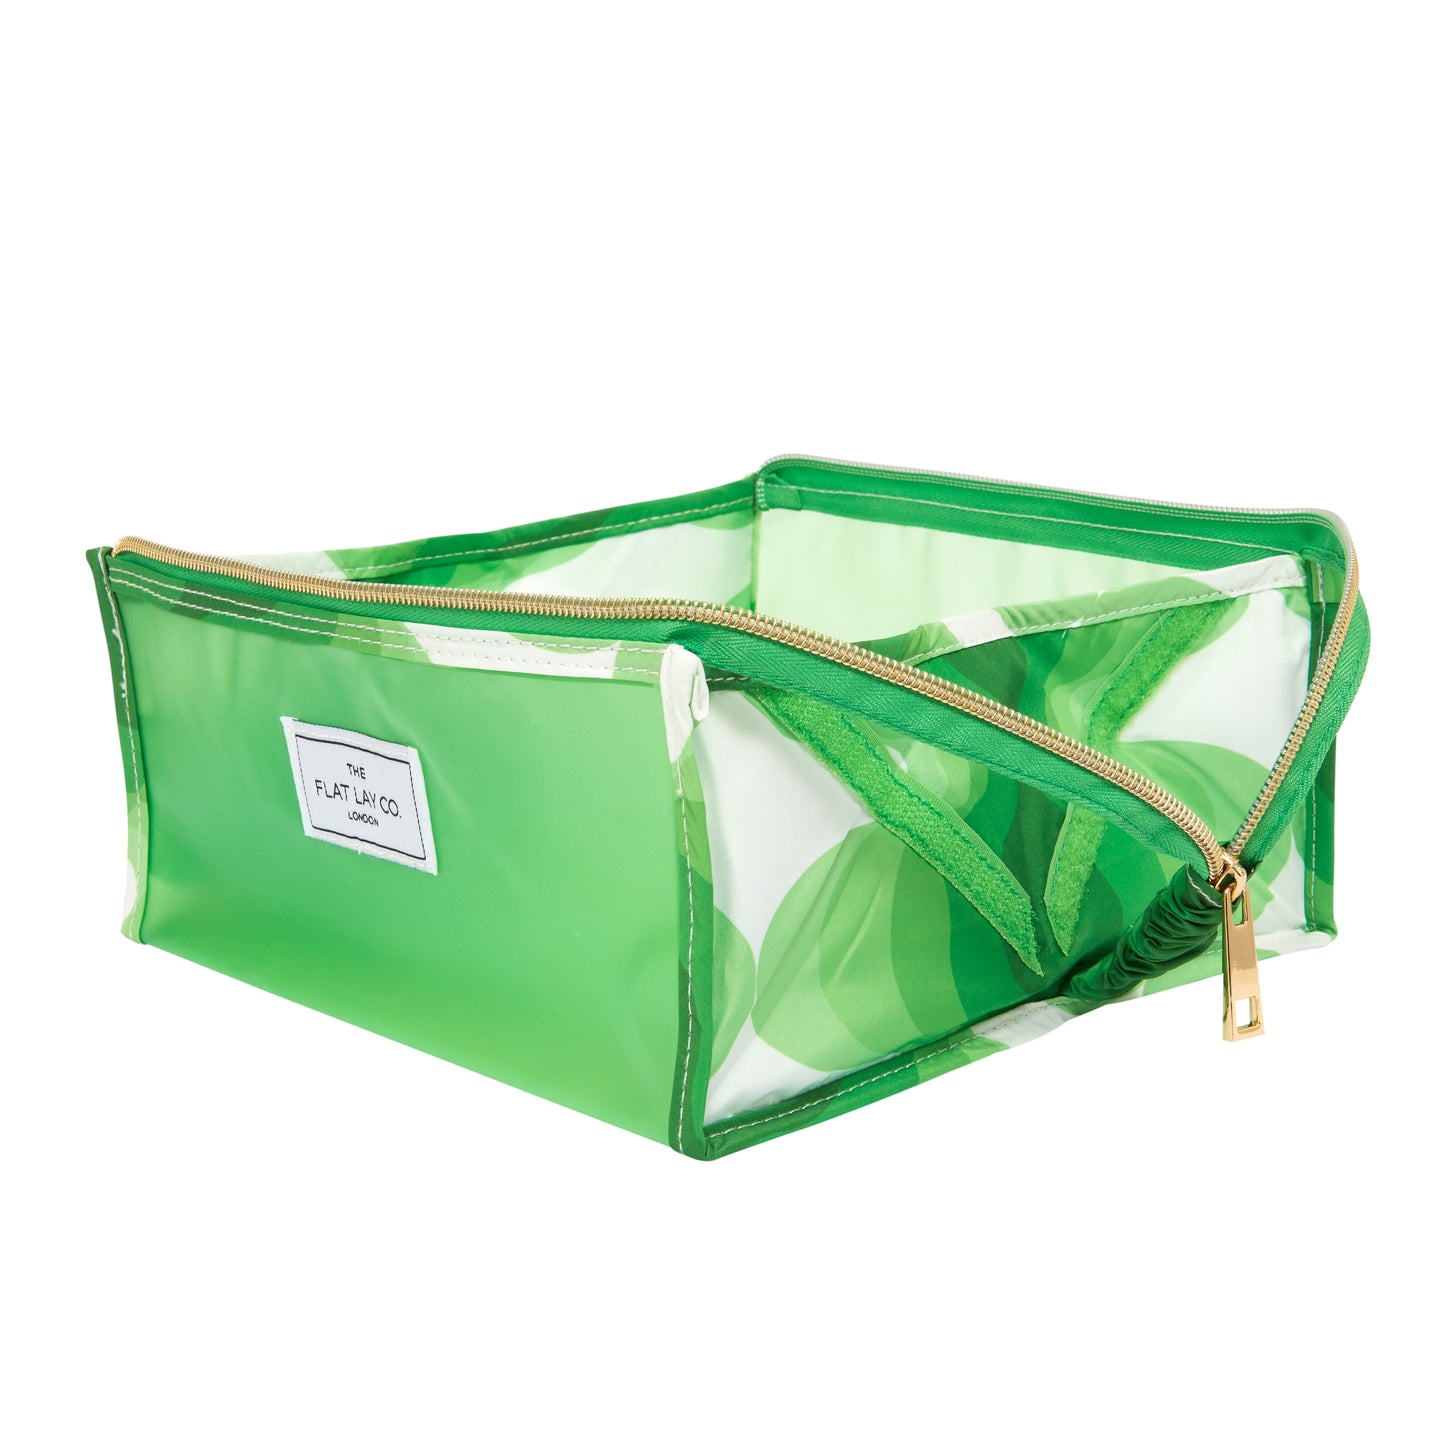 Frosted Jelly Open Flat Box Bag in Vibey Green